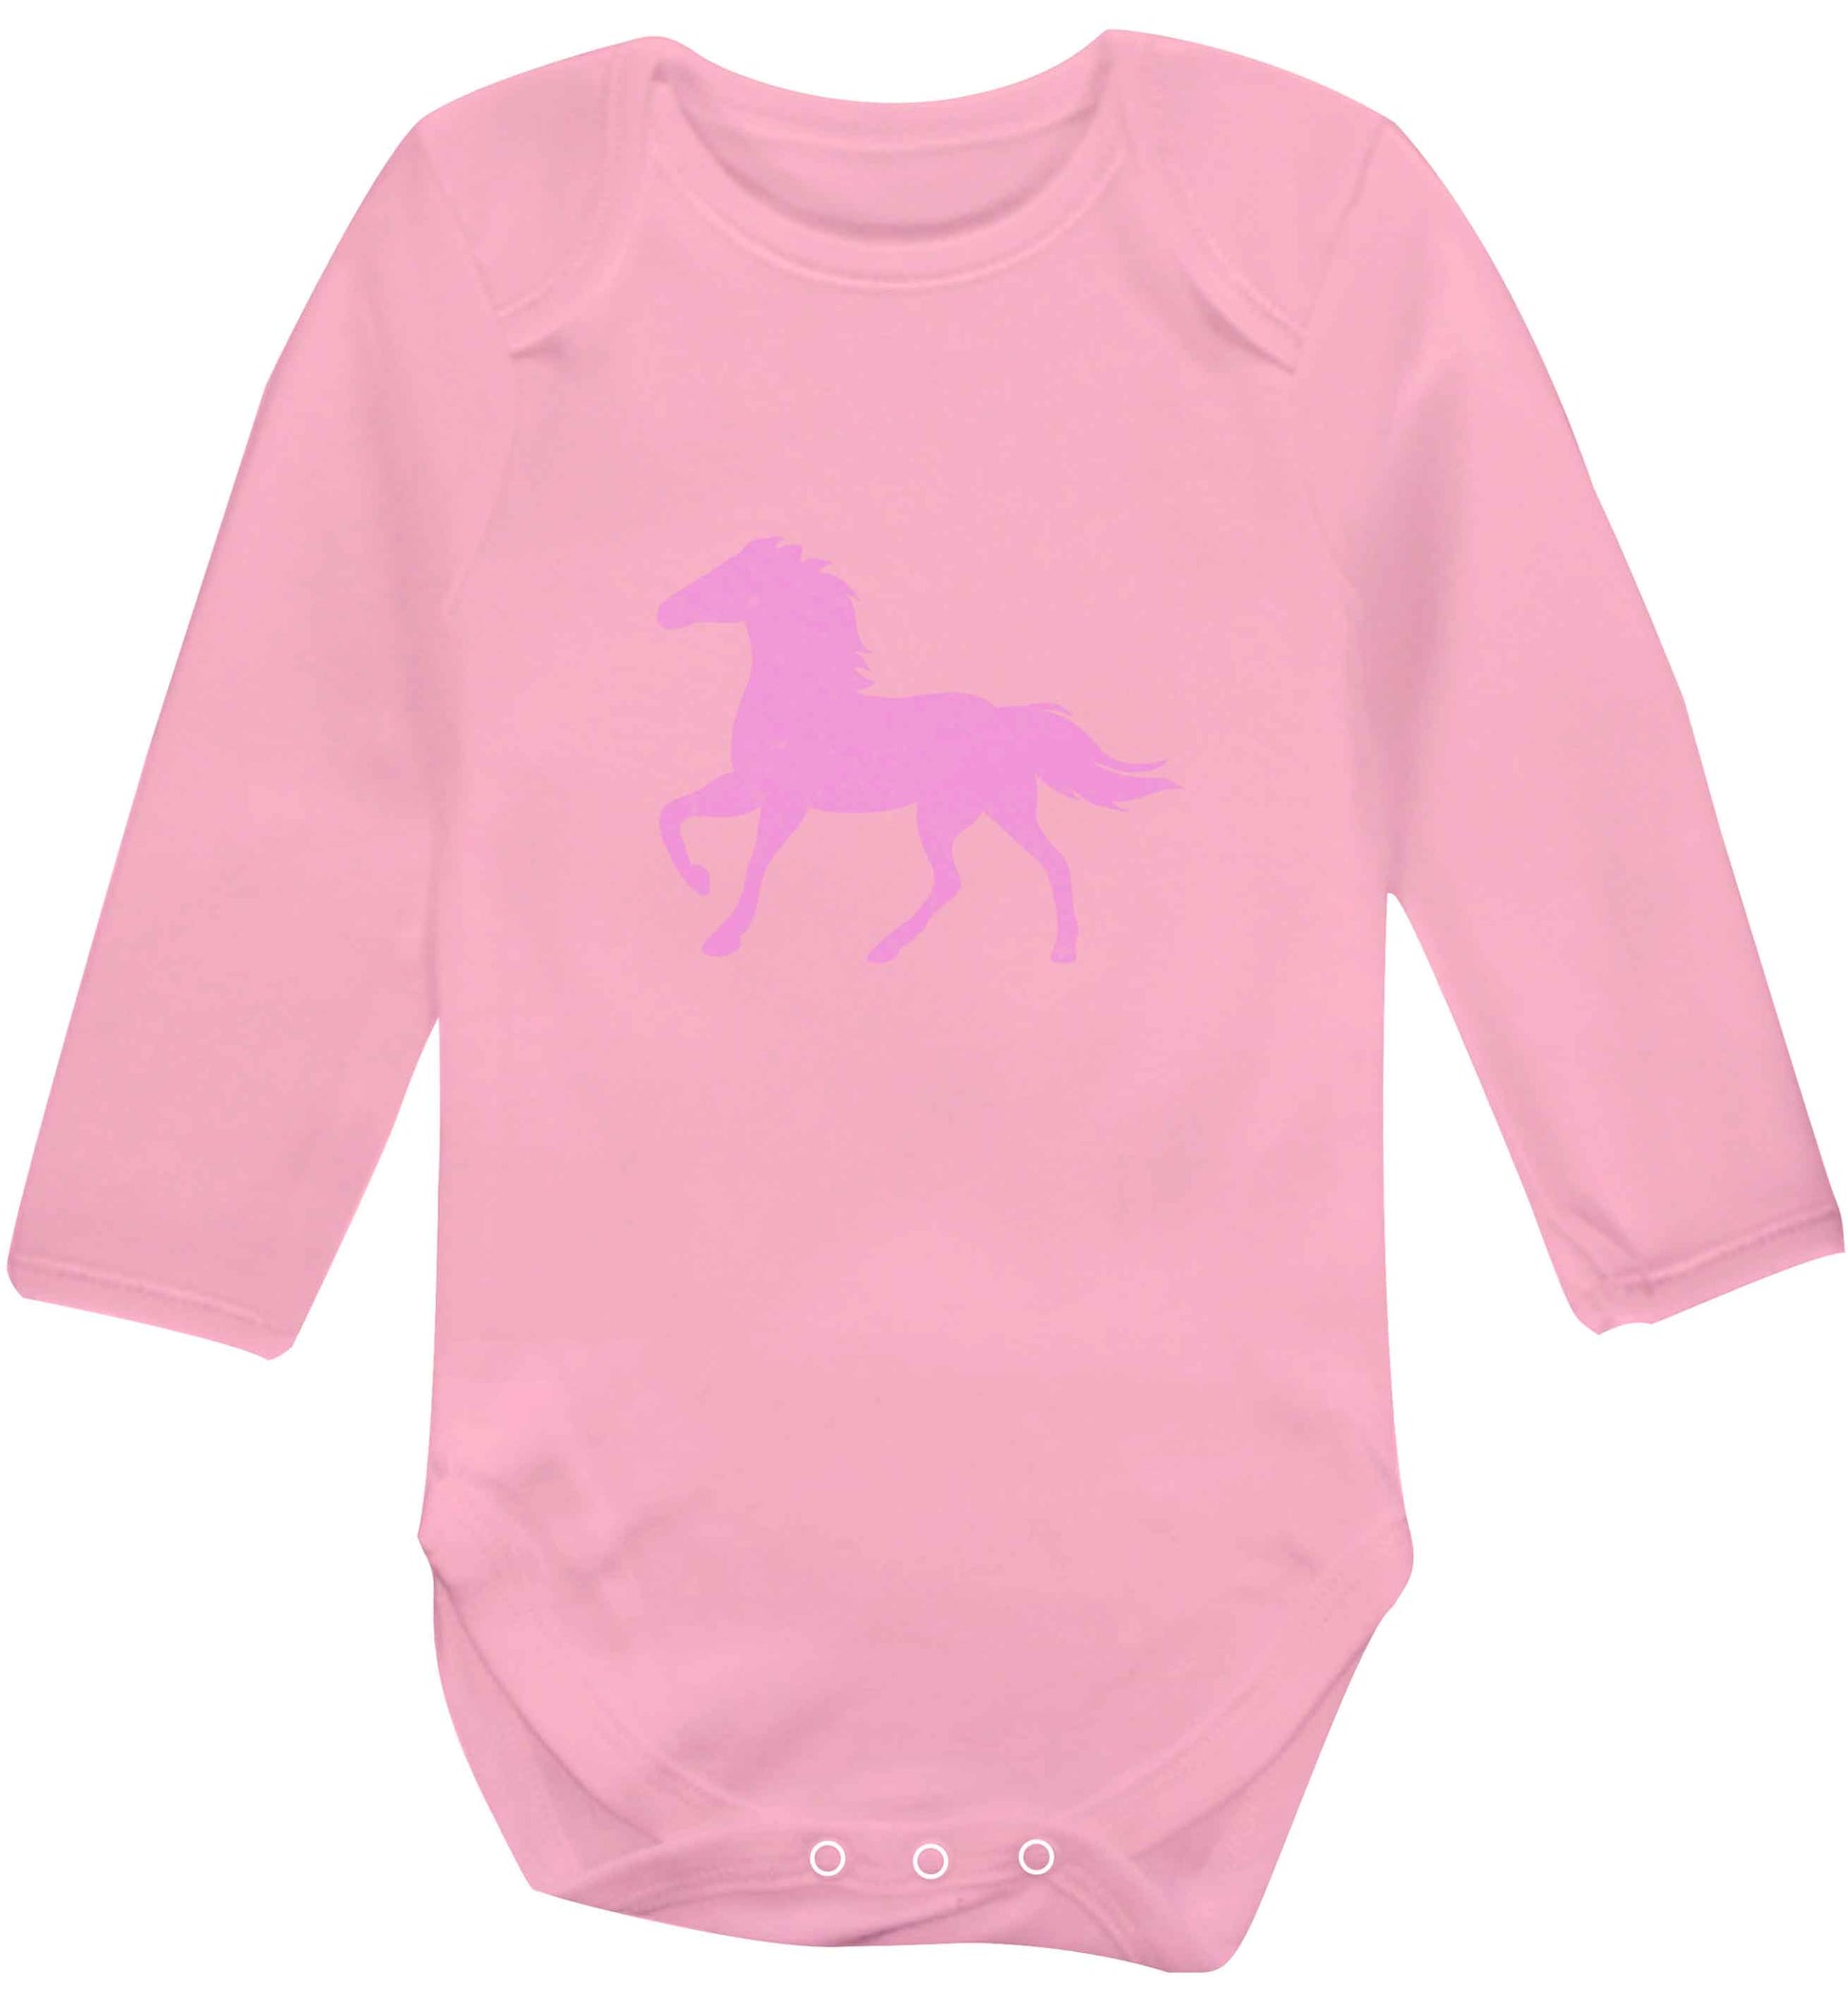 Pink horse baby vest long sleeved pale pink 6-12 months